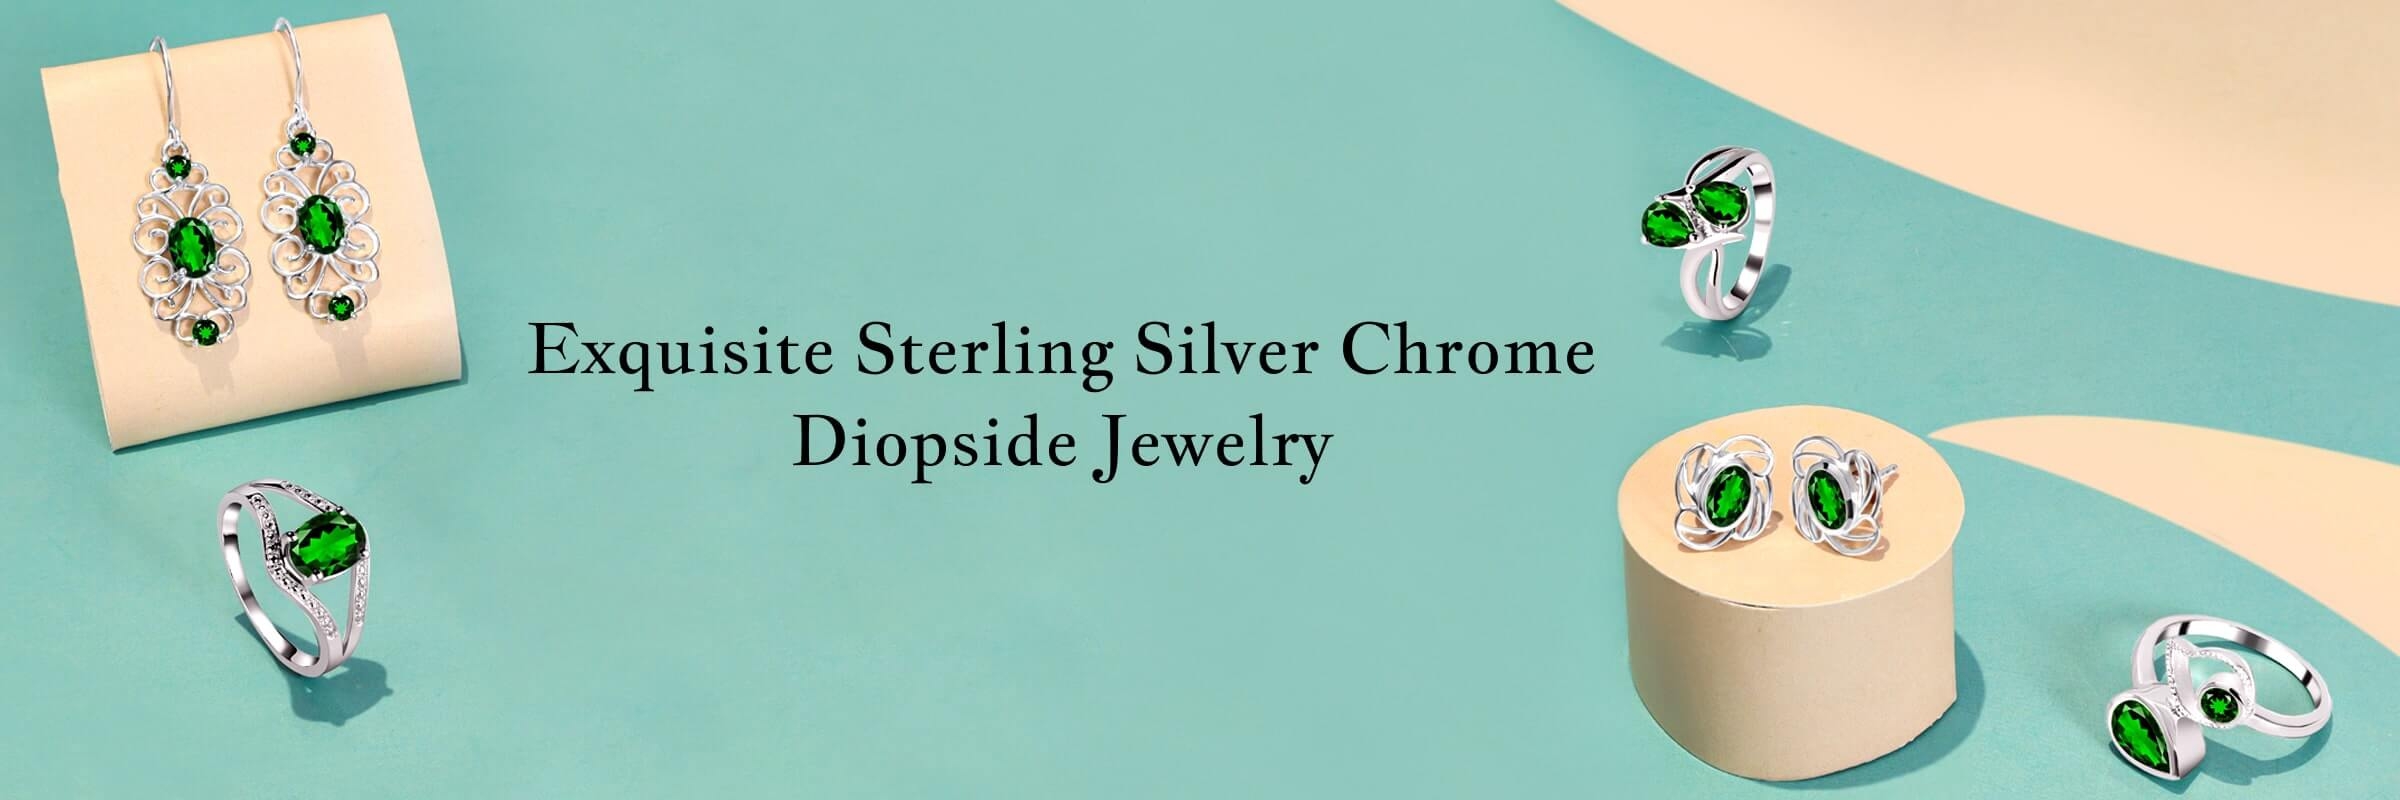 Sterling Silver Chrome Diopside Jewelry